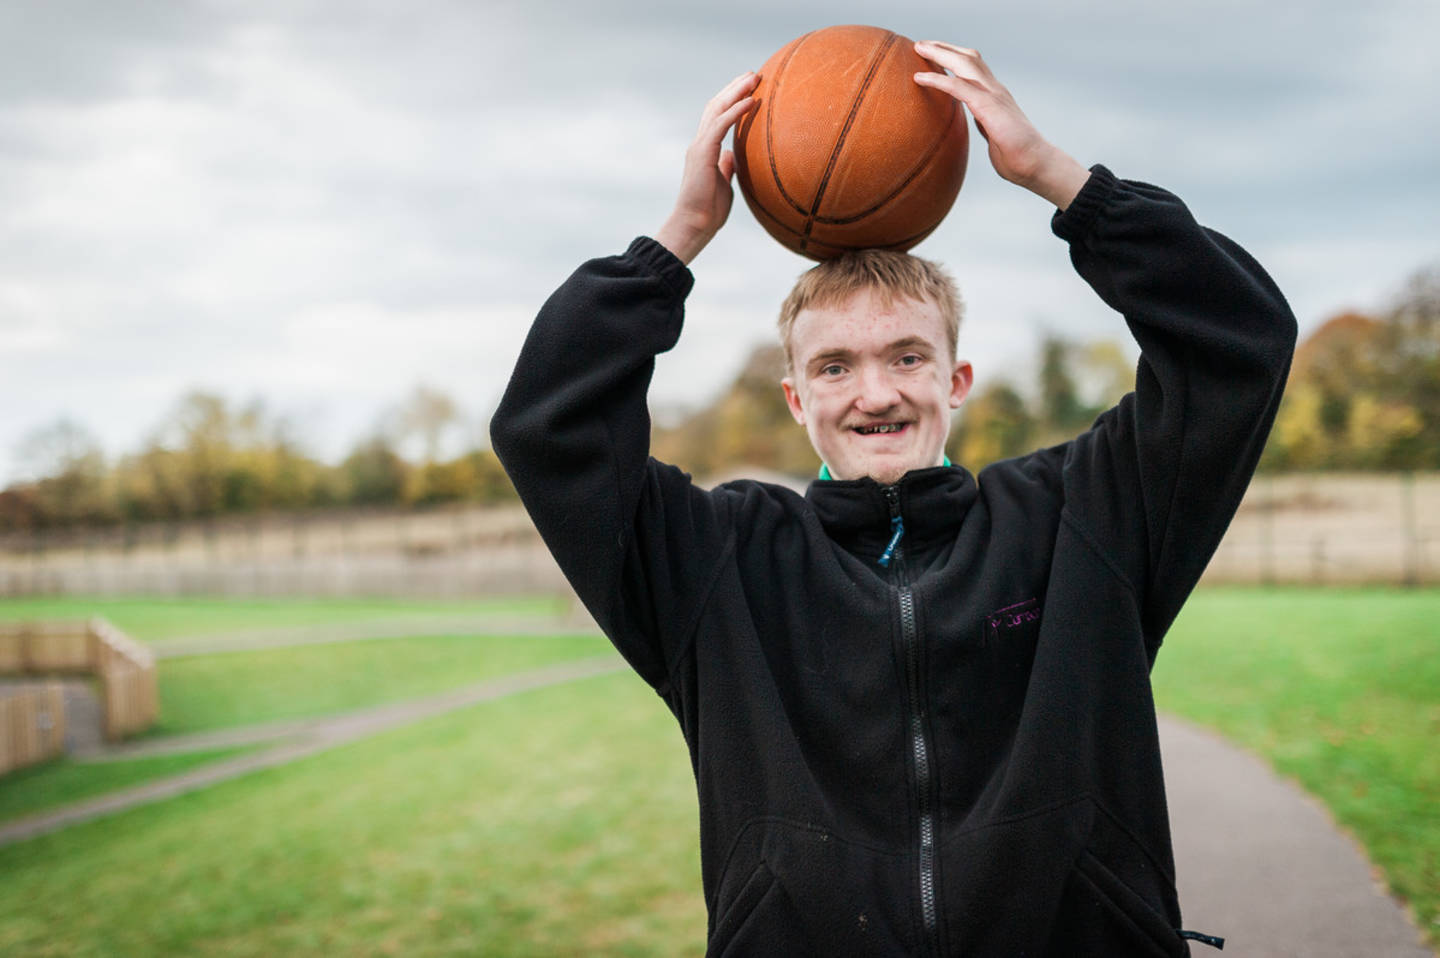 Person holding basketball - Leonard Cheshire Disability’s Can Do Sport programme aims to get 1,500 young disabled people into sport over the next three years